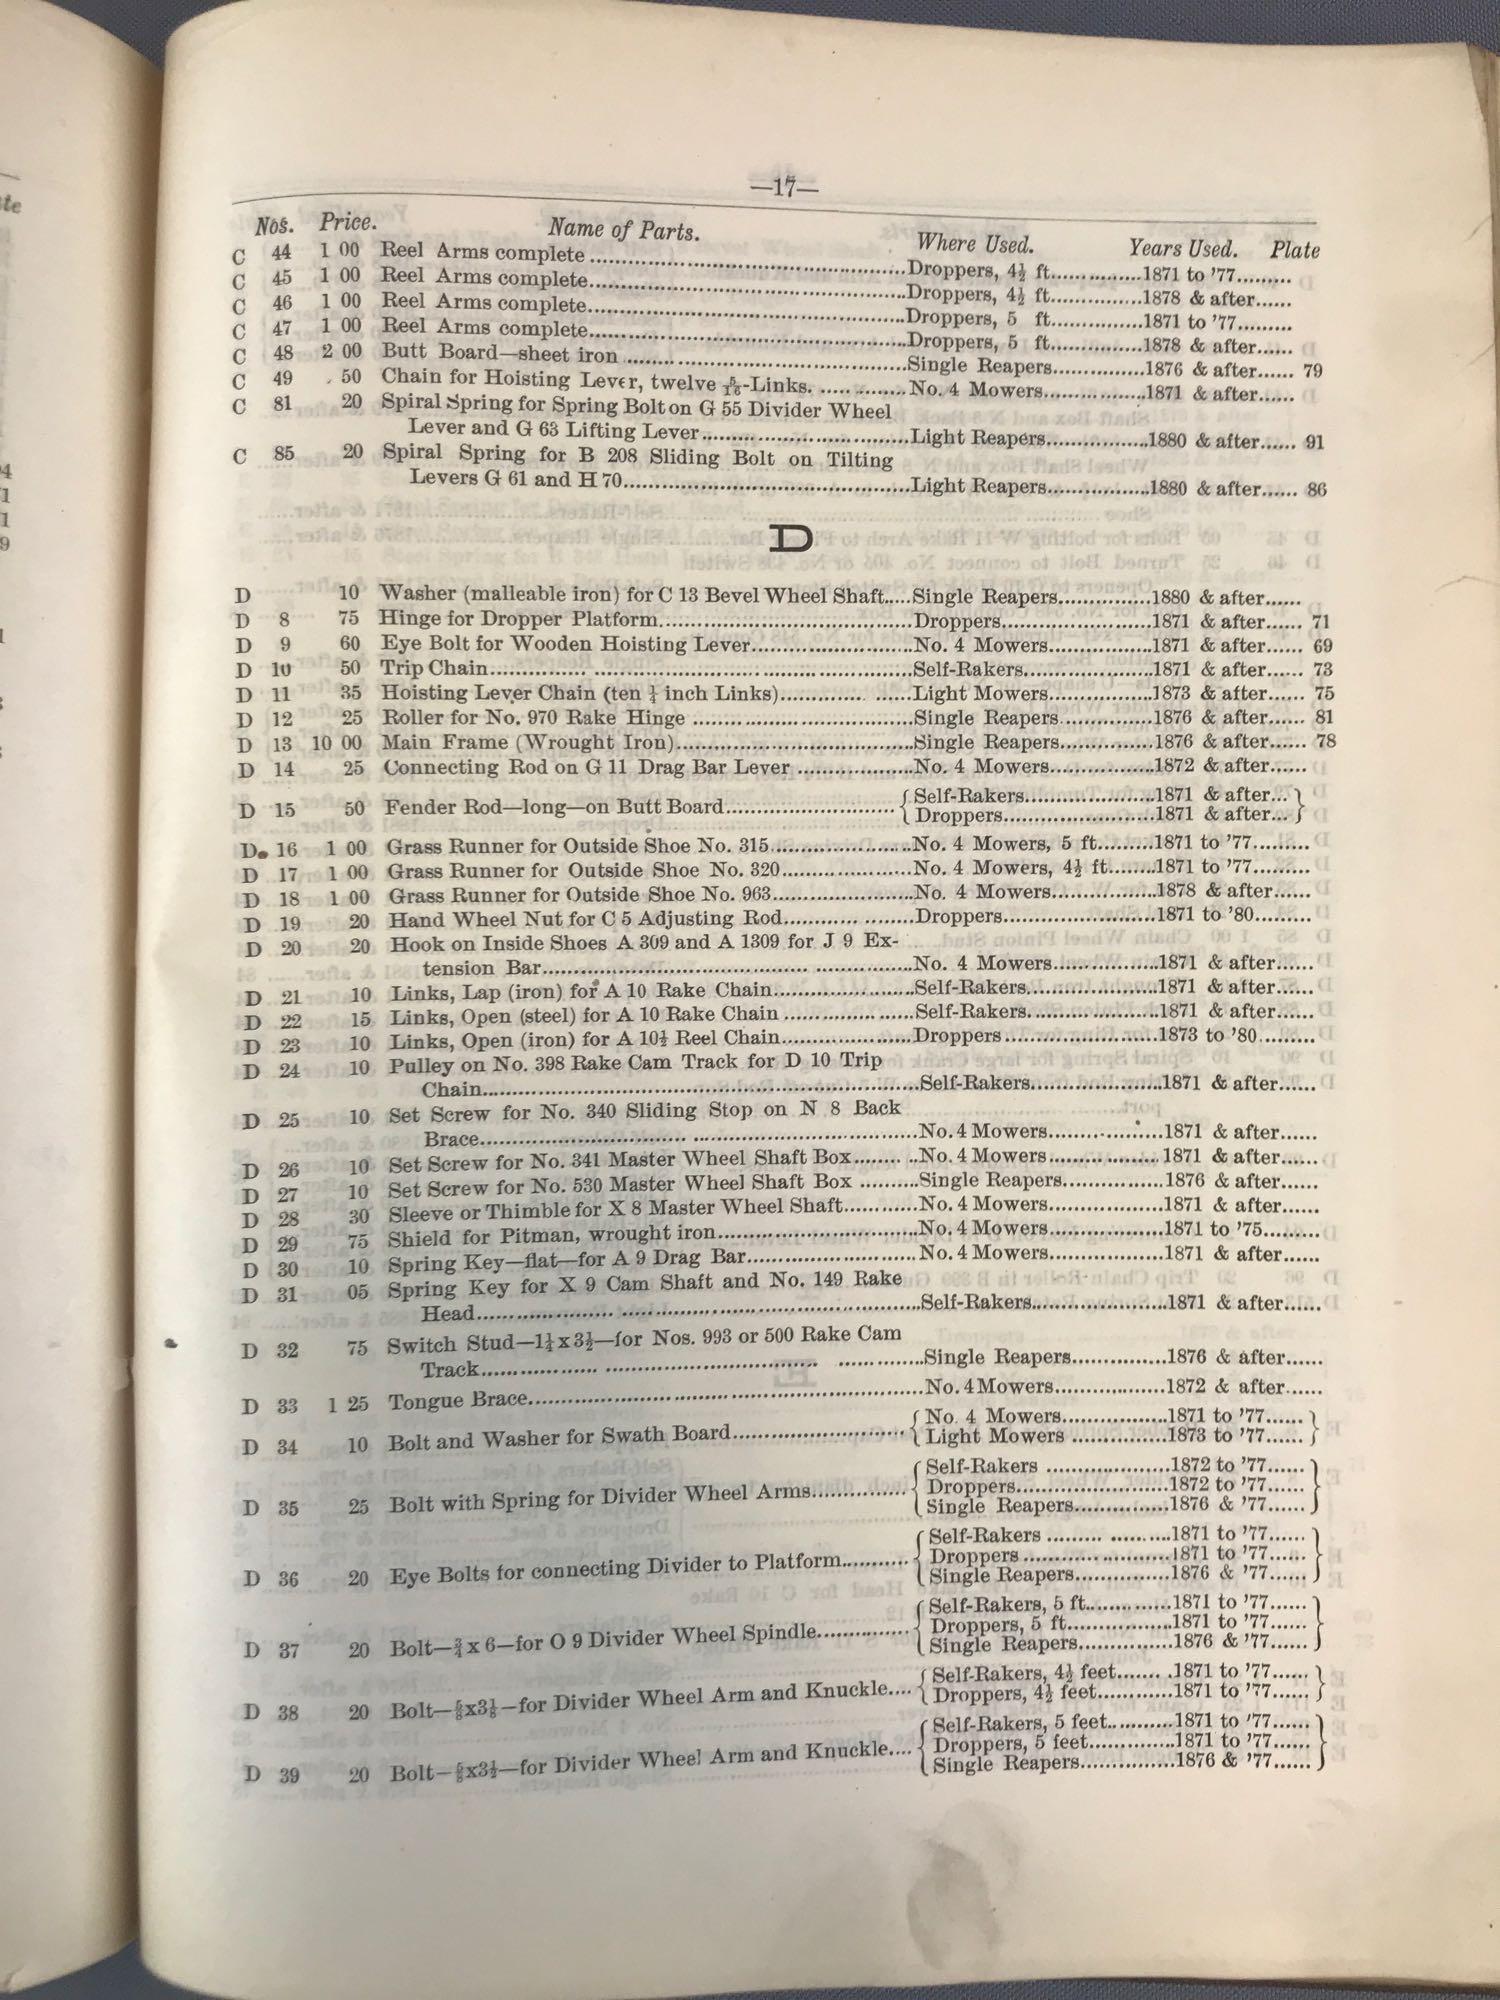 Antique bound Farm Implement and Mower Price Lists